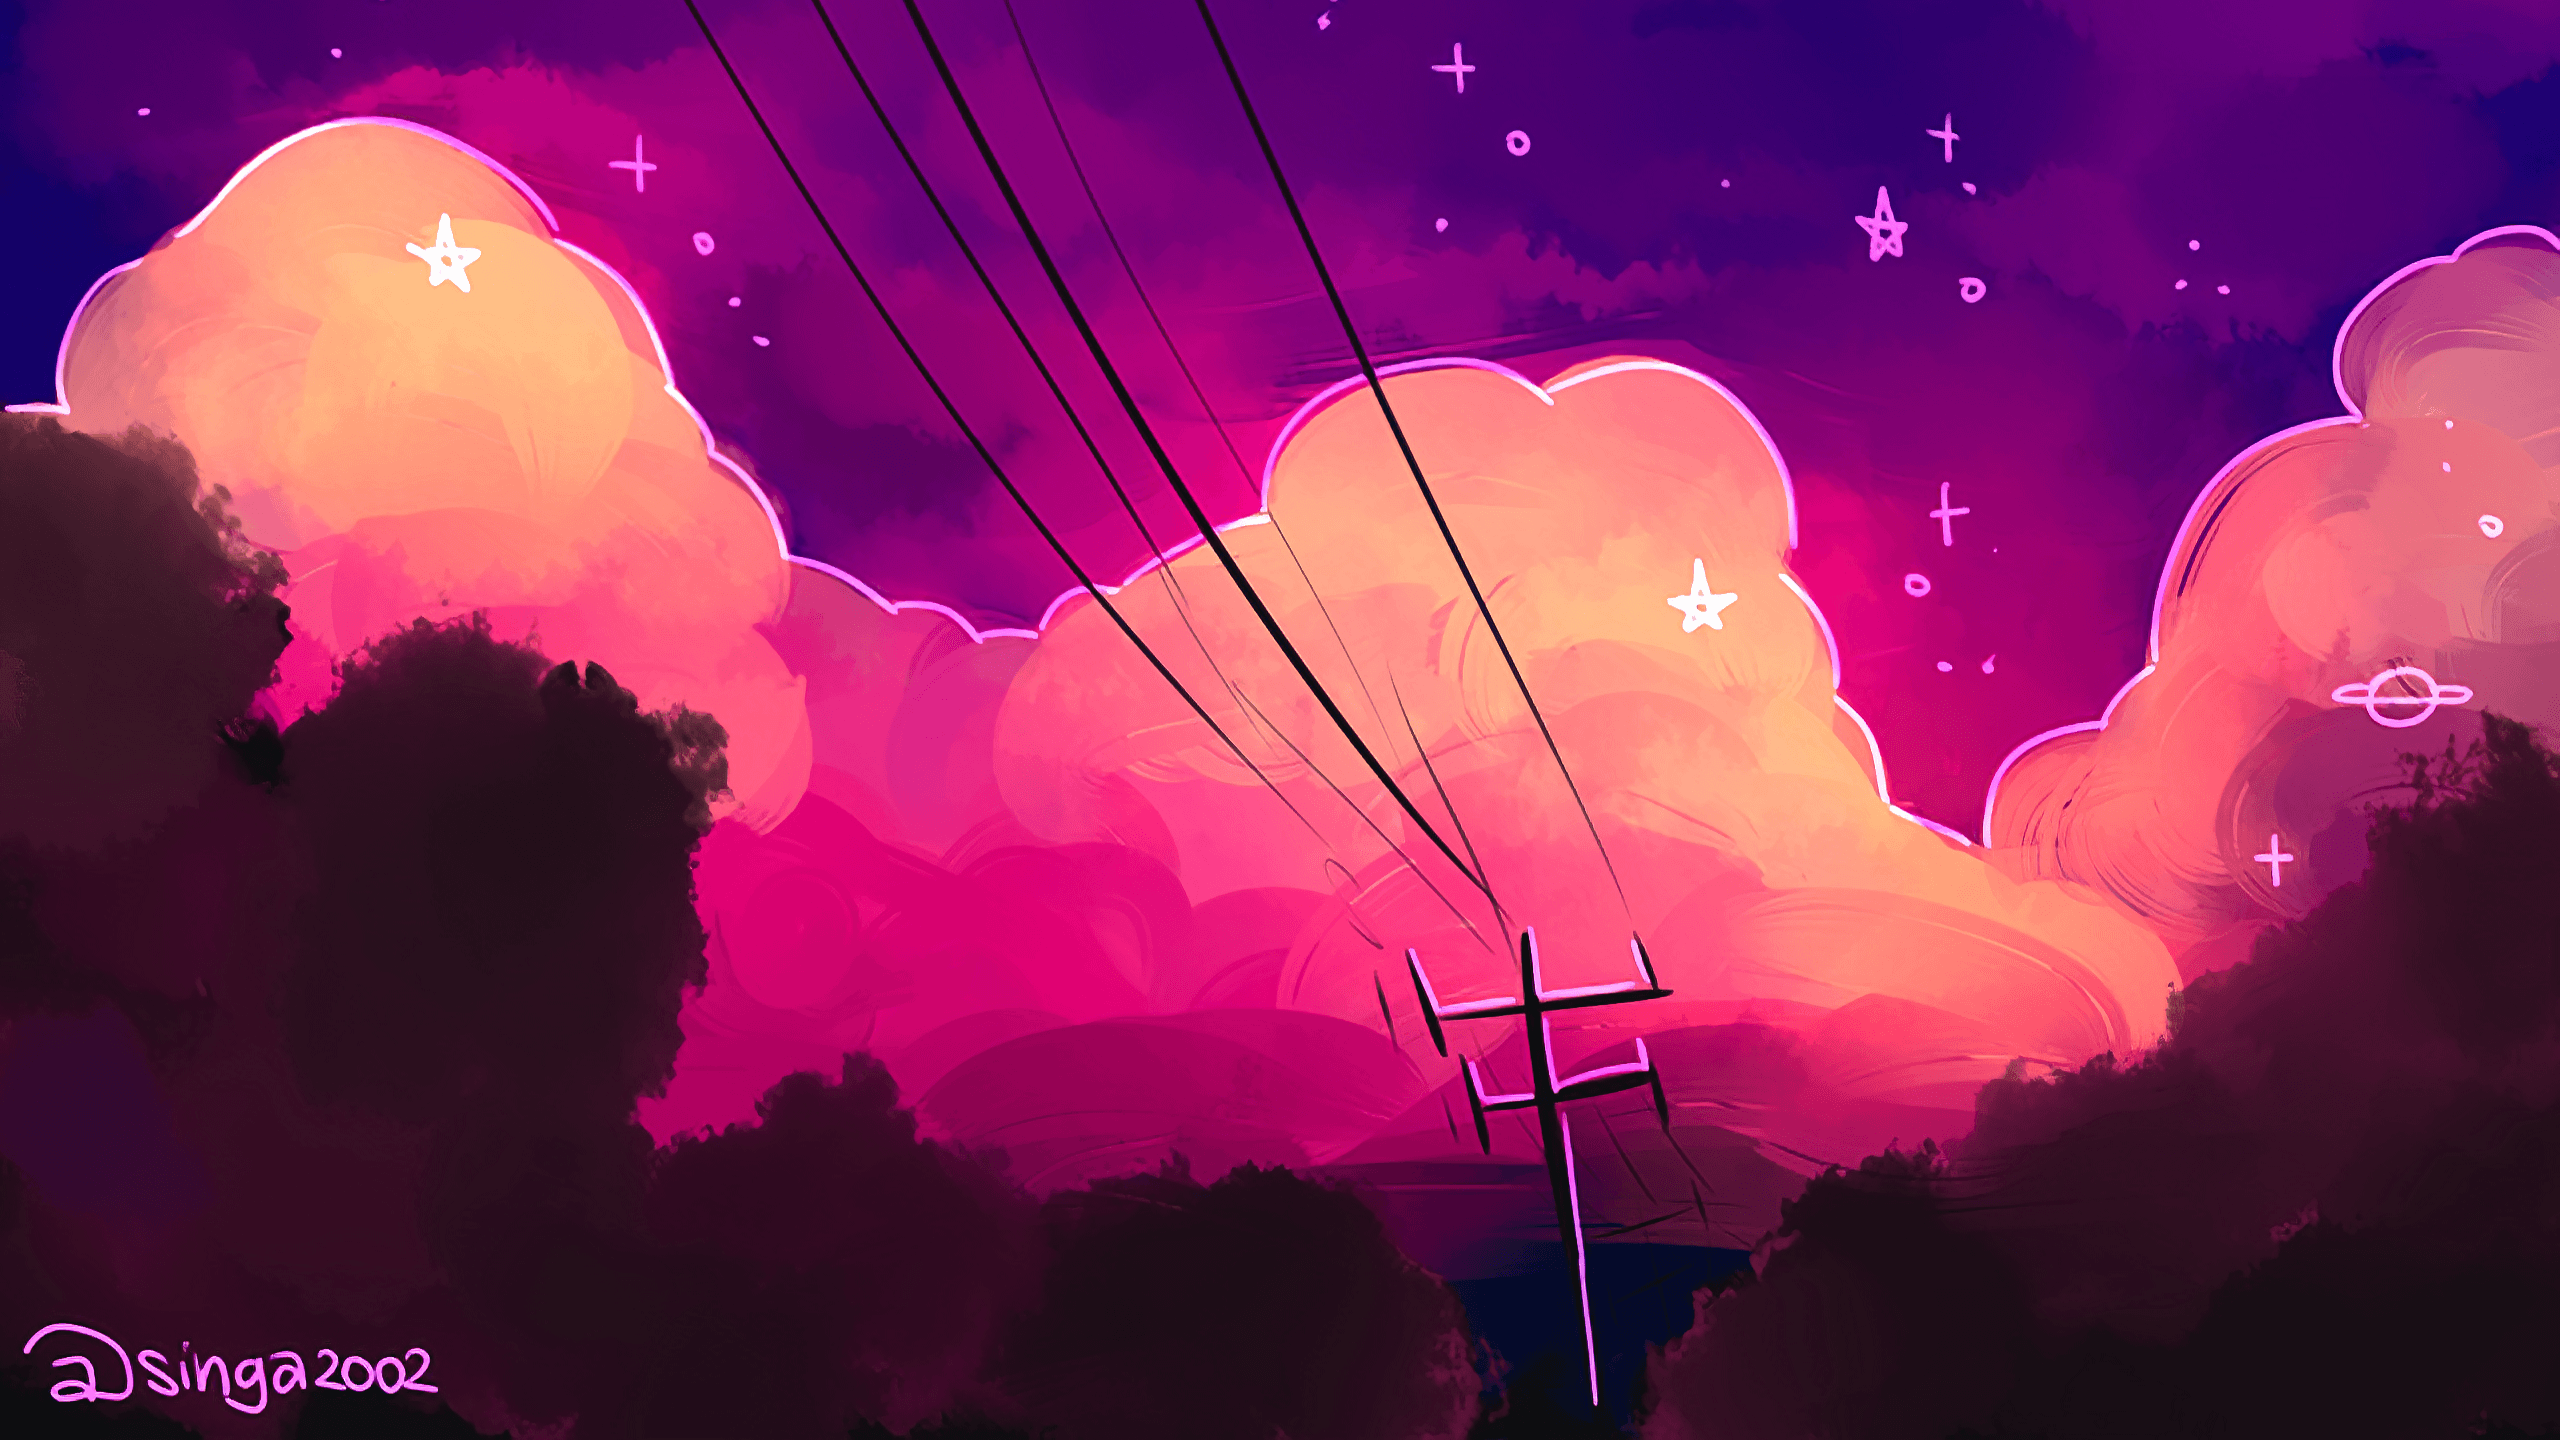 A painting of the sky with clouds and electric poles - 2560x1440